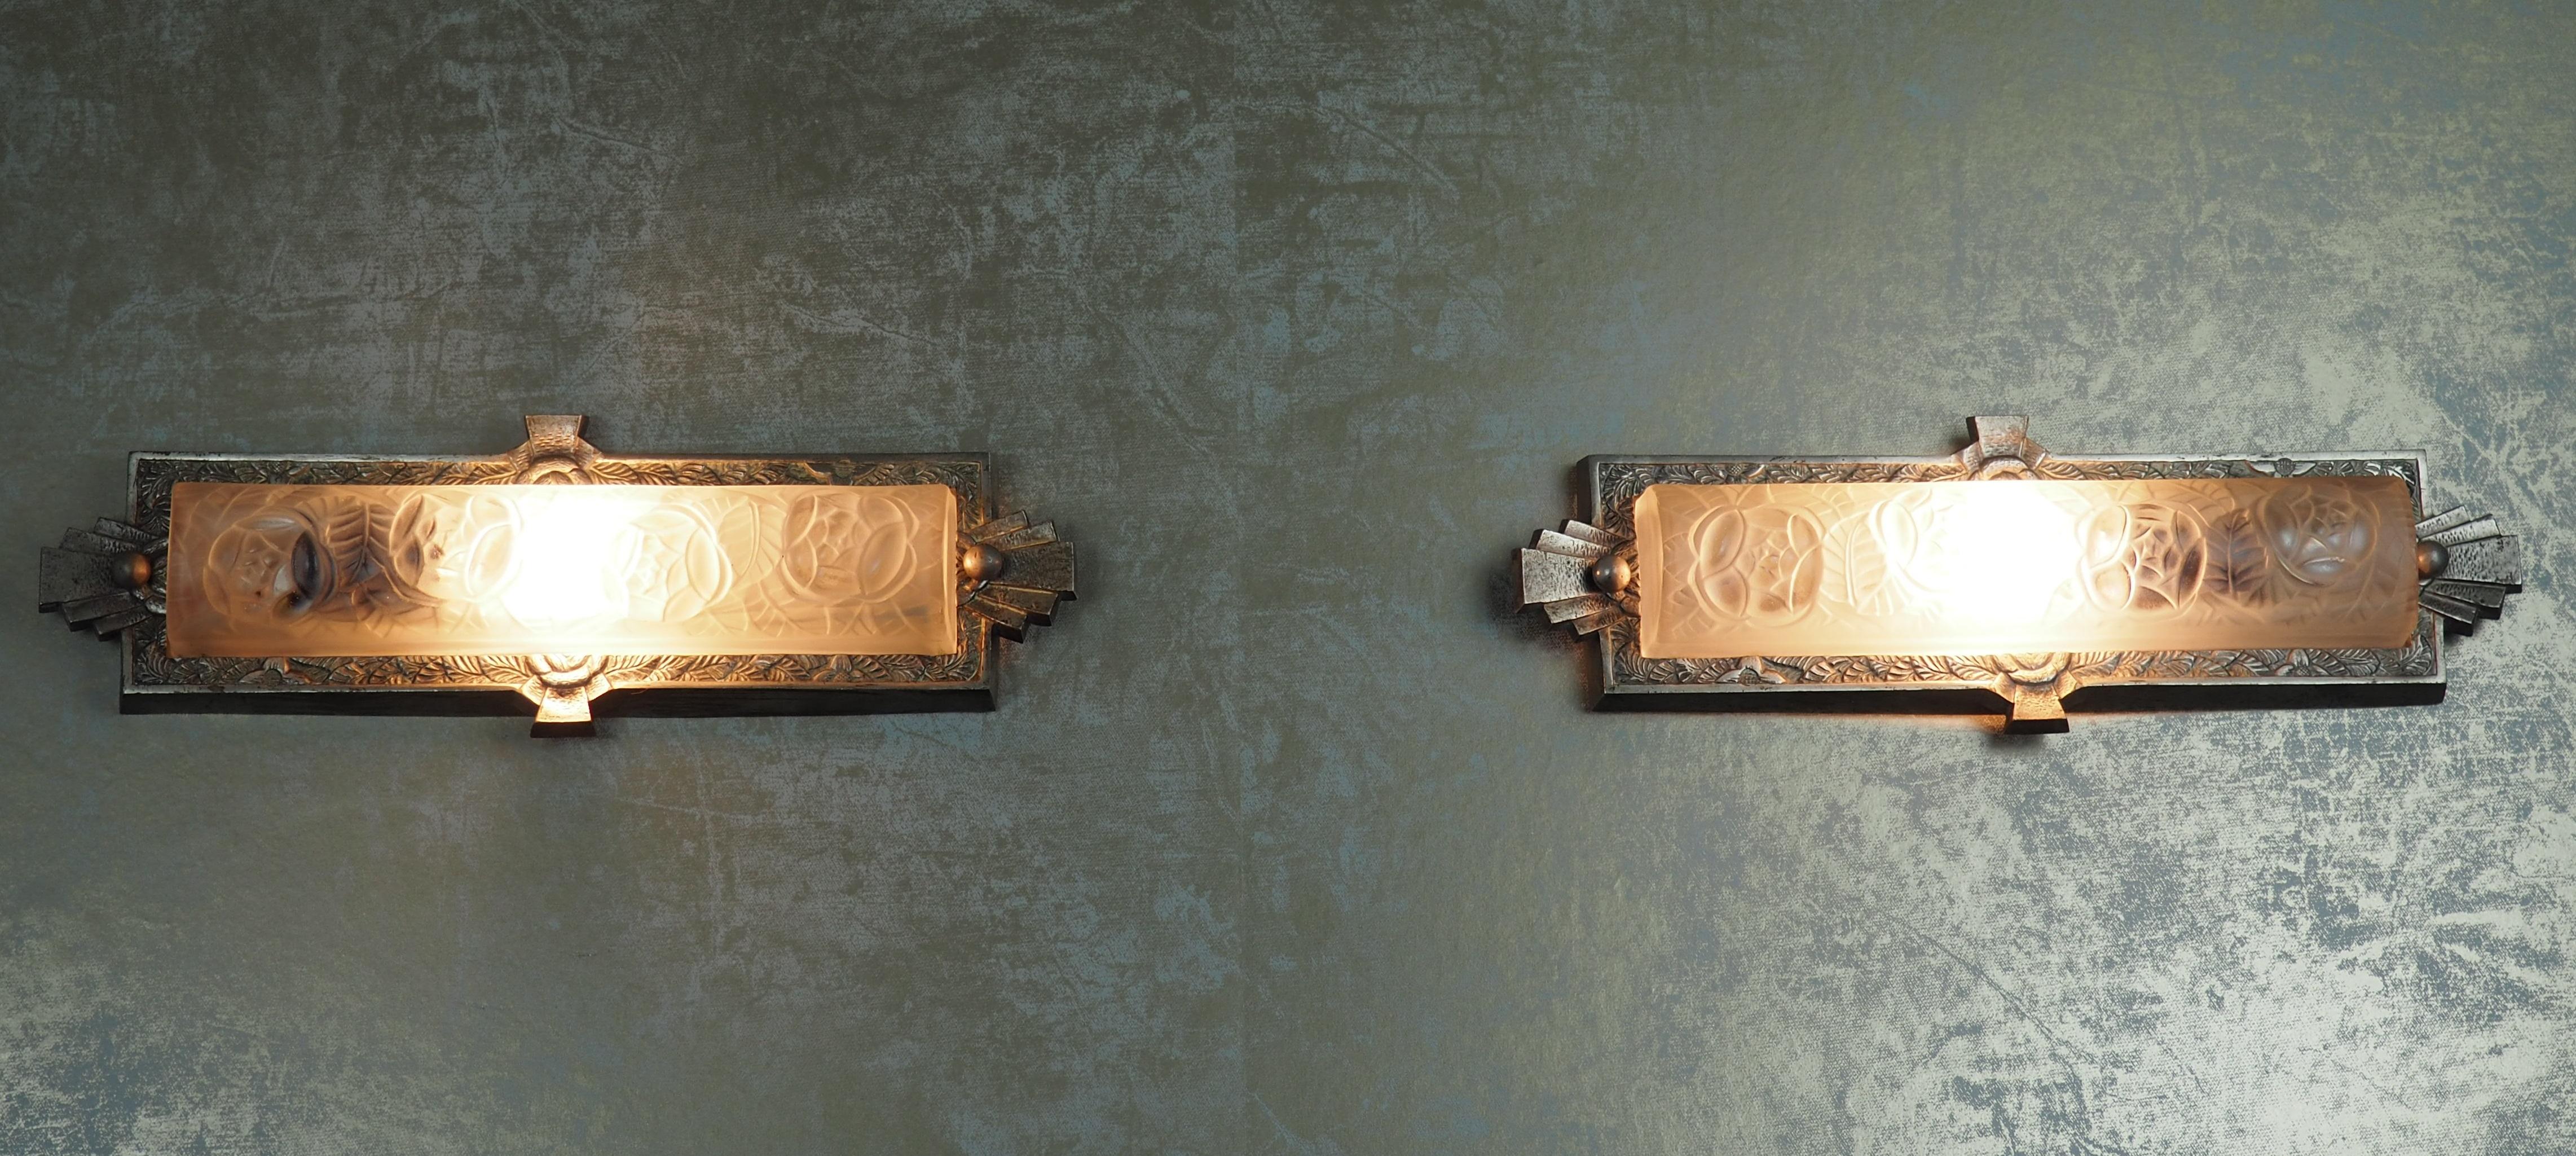 French Pair of Rare Art Deco Wall Sconces by Degue, France, circa 1920s